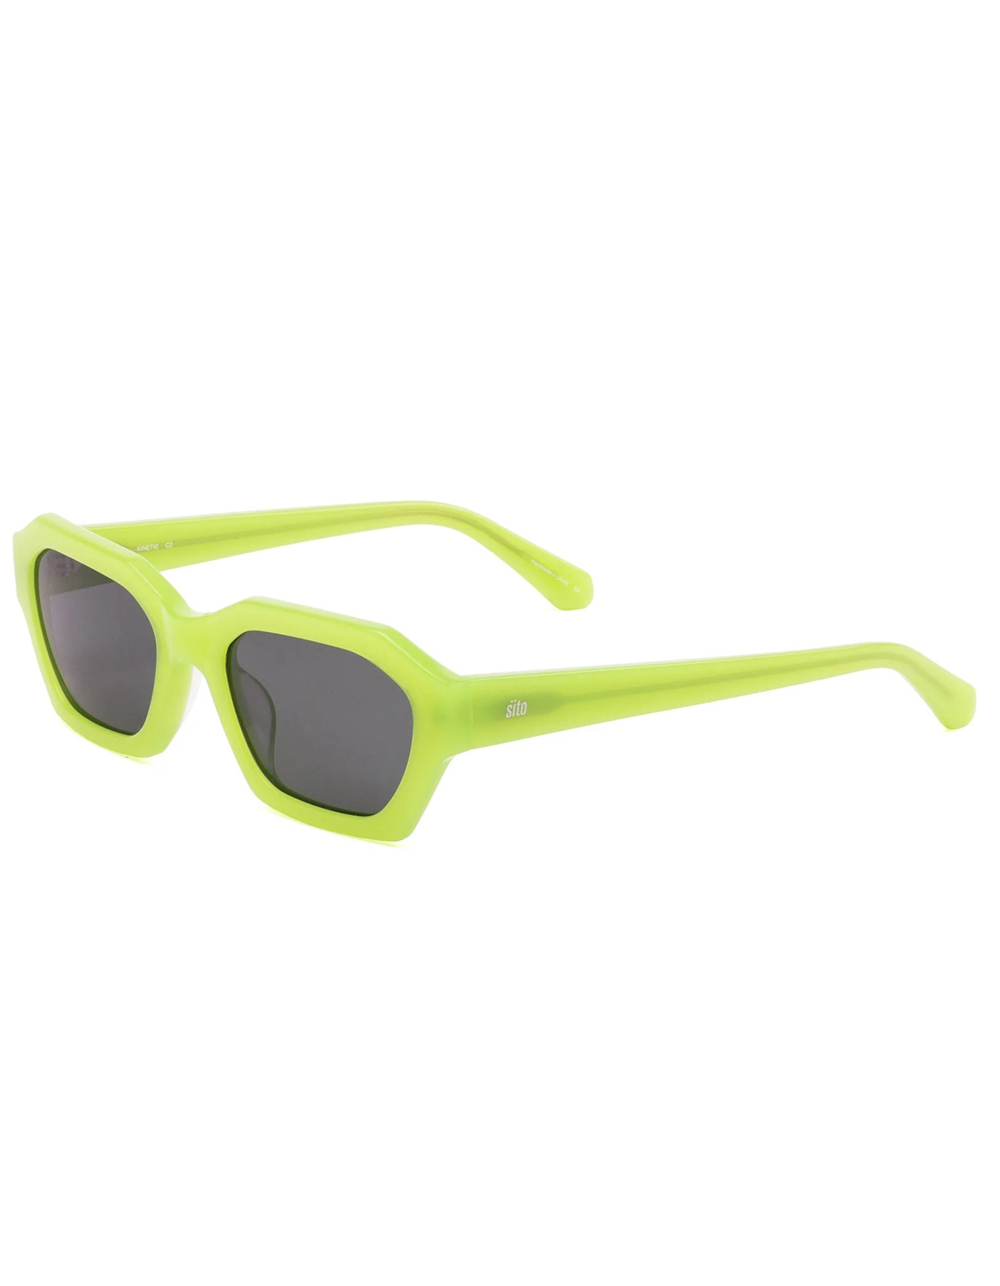 SITO Kinetic Sunglasses - LIME | Tillys